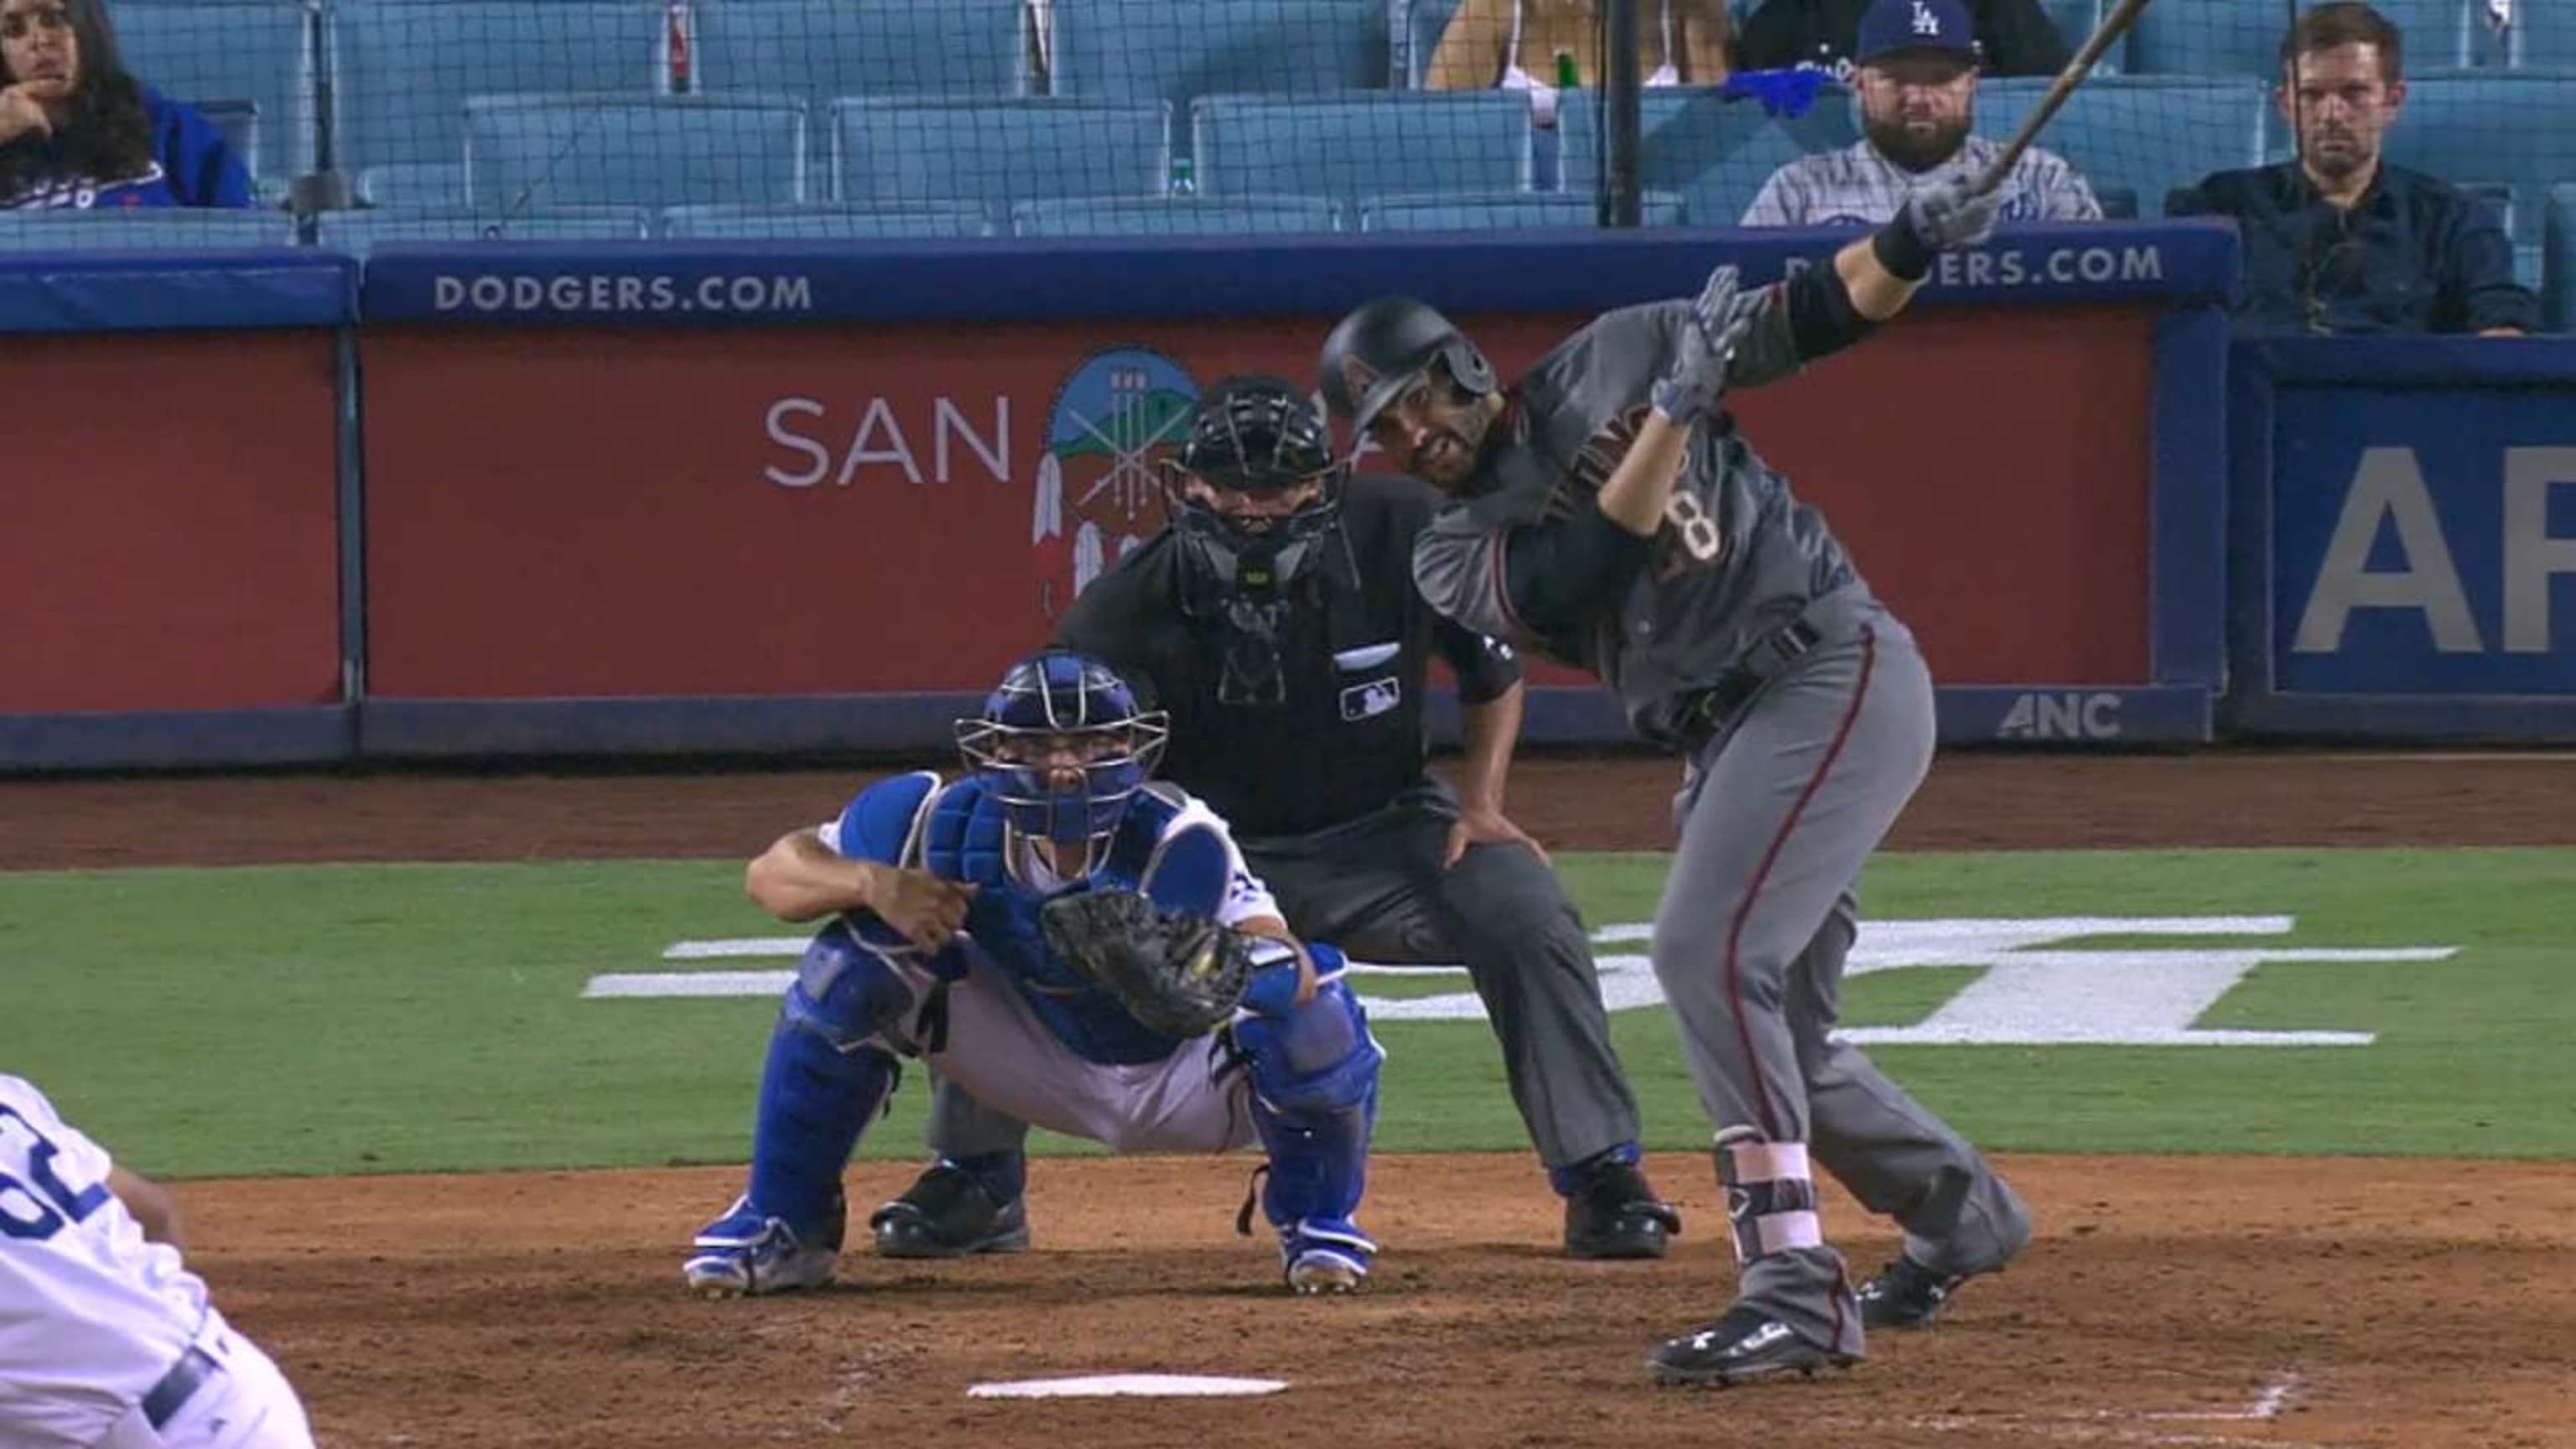 WATCH: J.D. Martinez hits 4th HR with D'backs